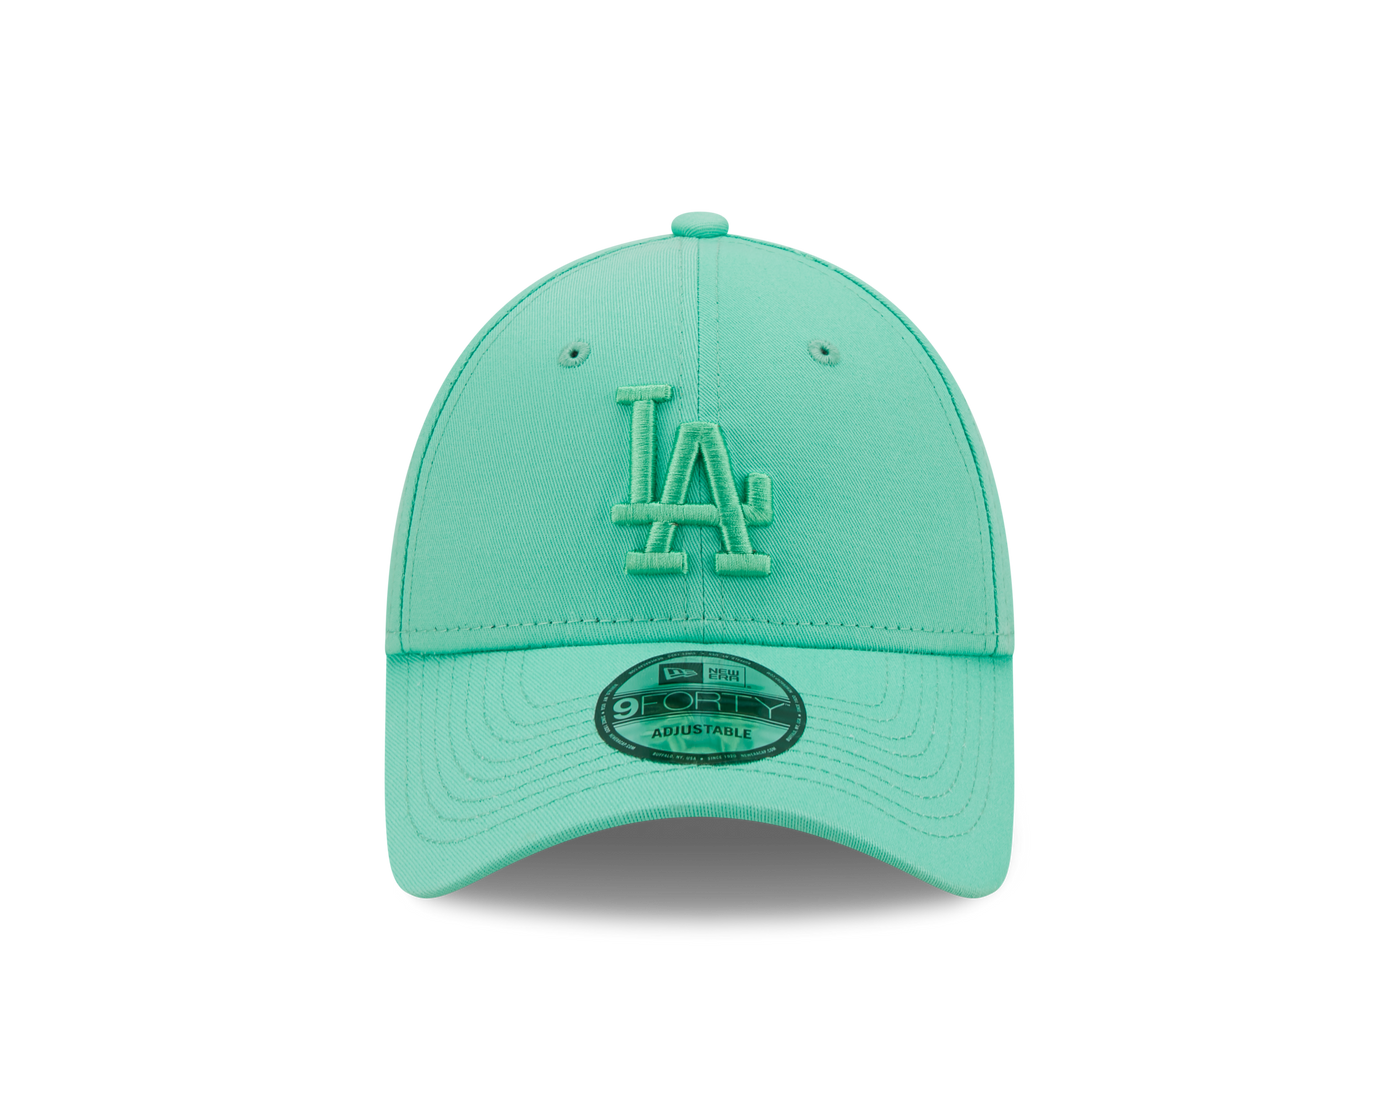 LOS ANGELES DODGERS LEAGUE ESSENTIAL 9FORTY GREEN 9FORTY CAP